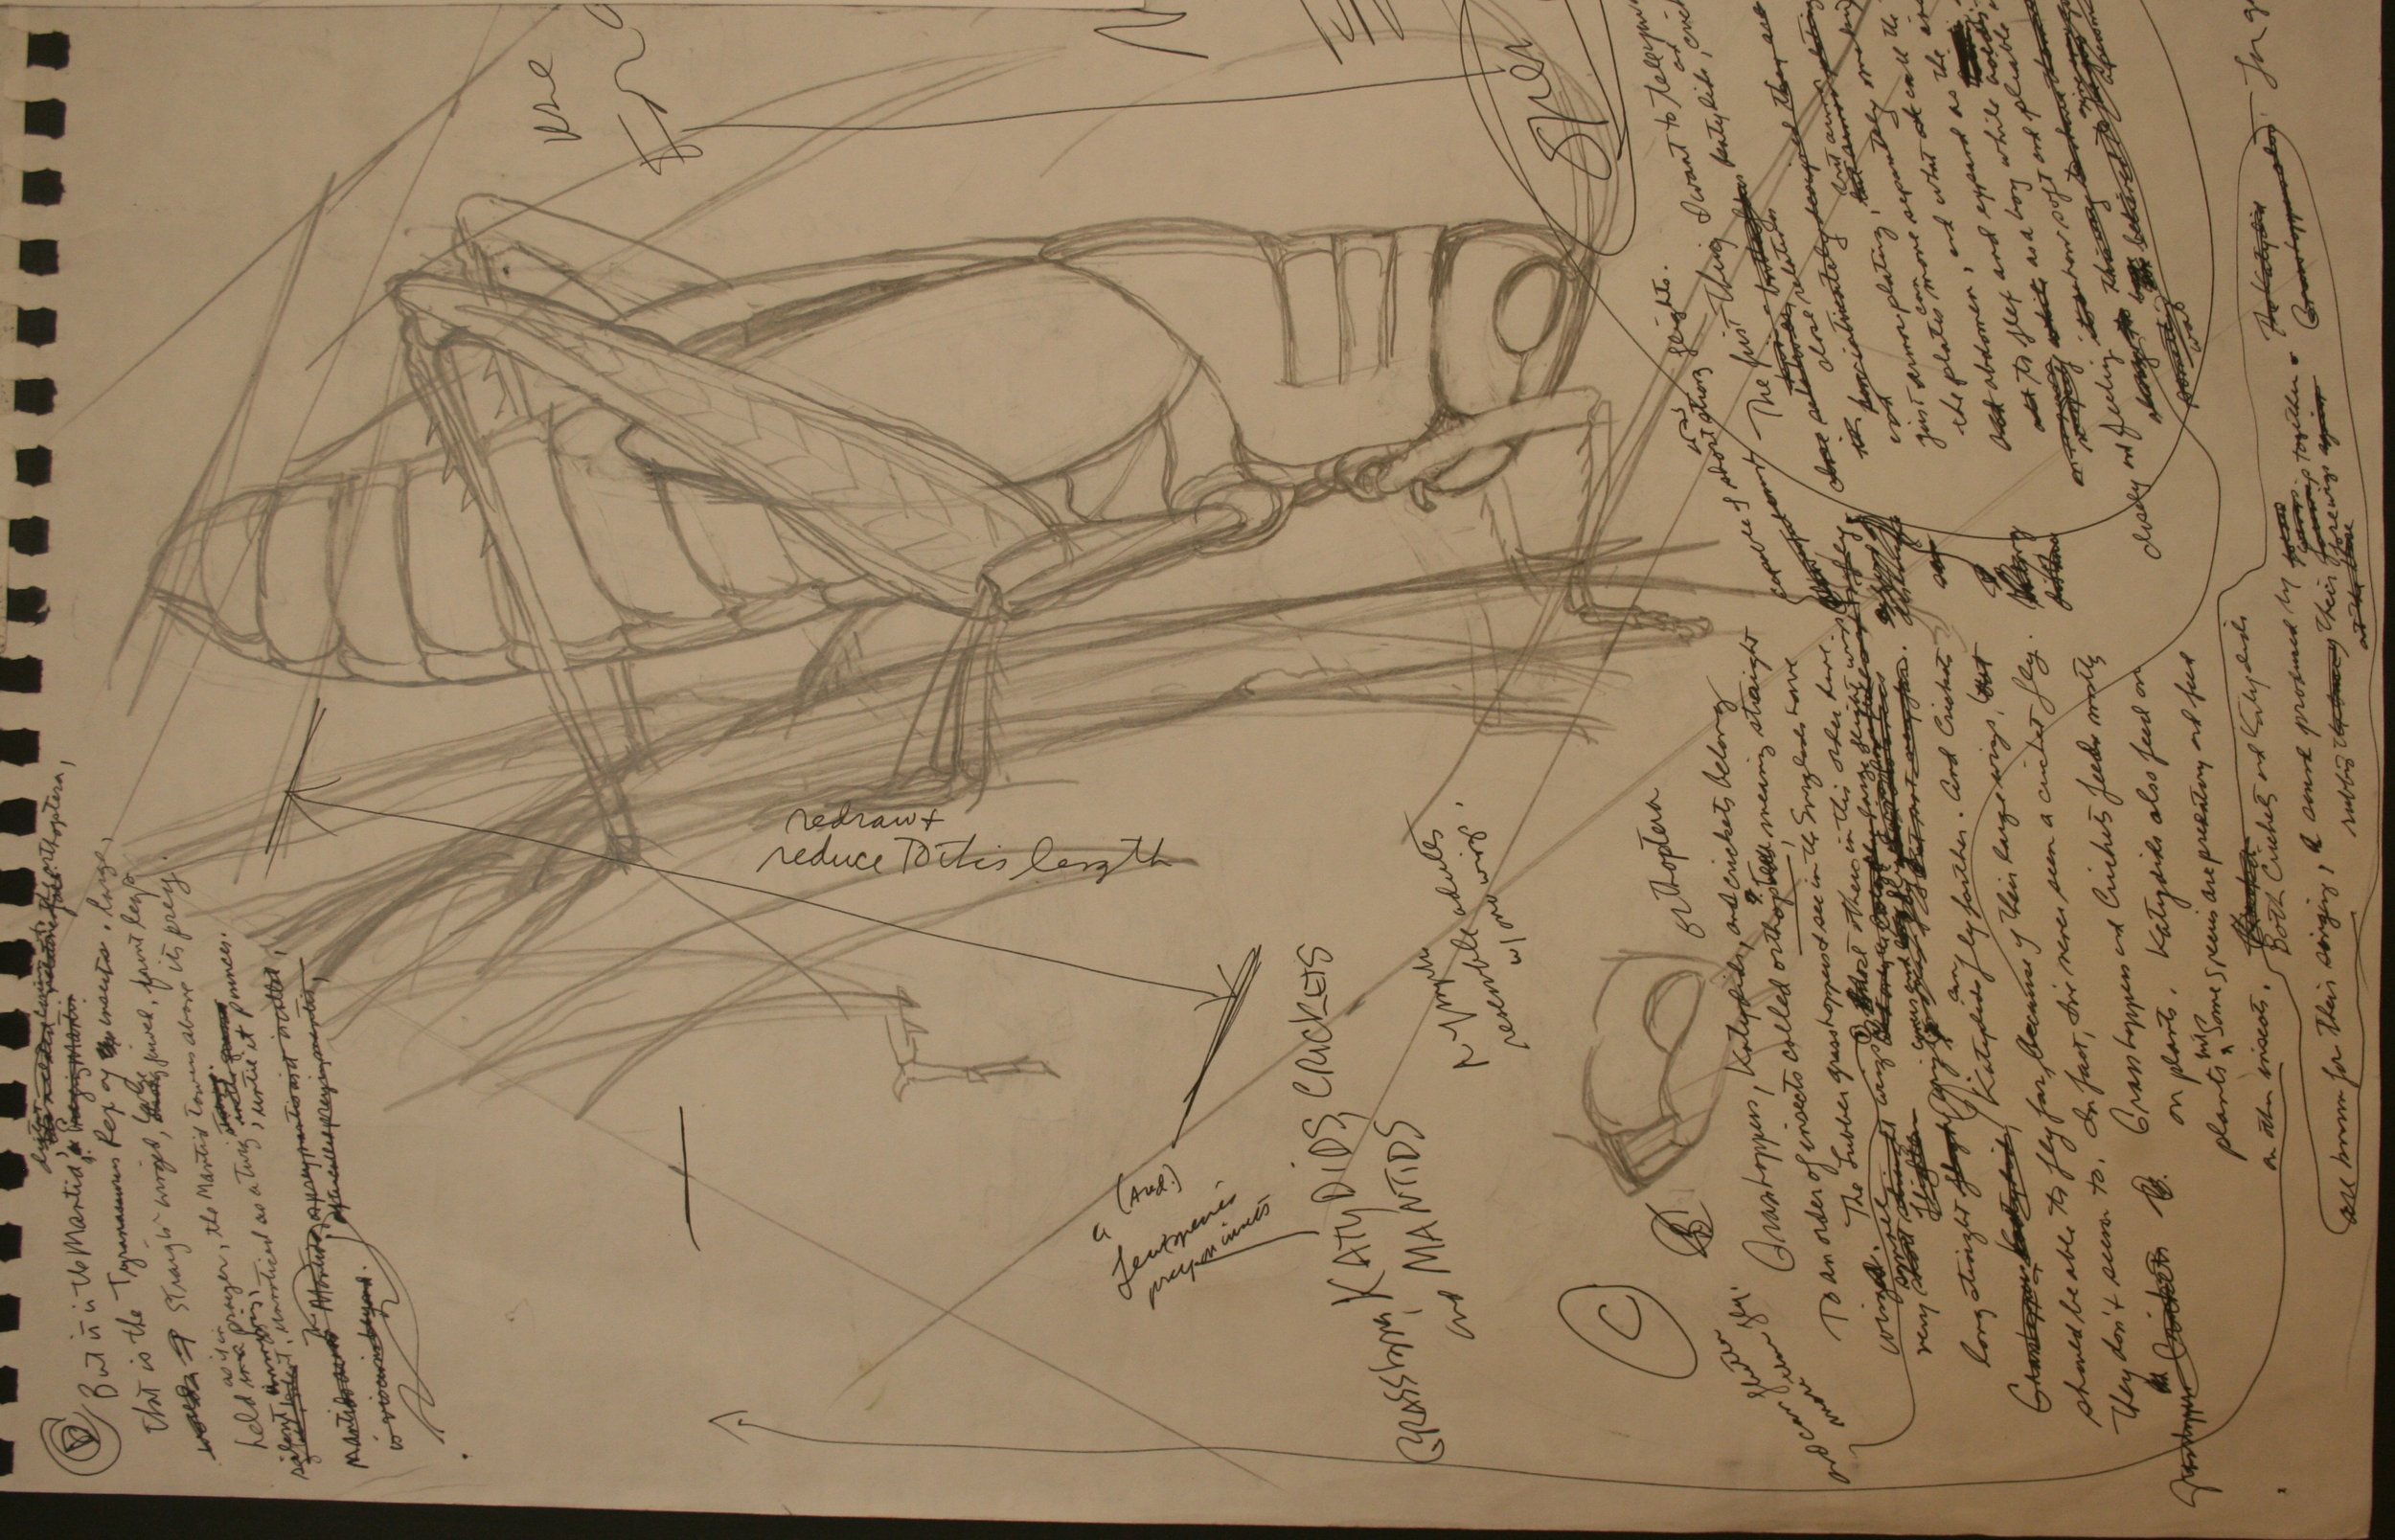 Jim Arnosky; Sketch preliminary pages; Pencil, pen; for "Creep and Flutter"